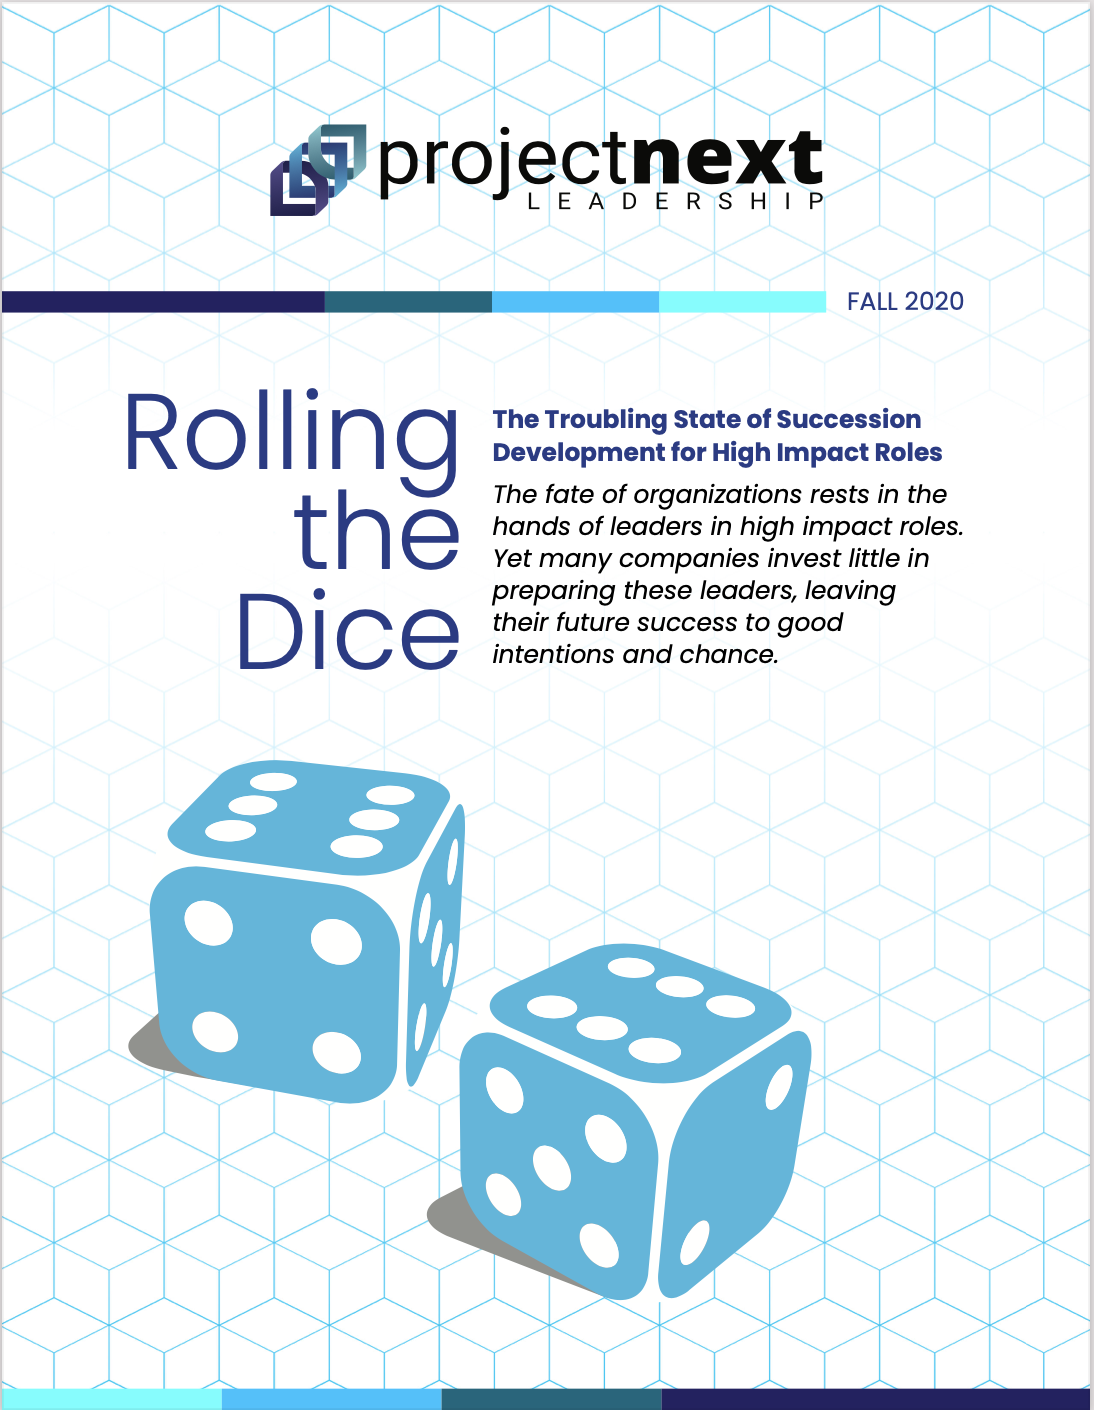 You are currently viewing ProjectNext Leadership Announces Research Findings Rolling the Dice: The Troubling State of Succession Development for High Impact Roles